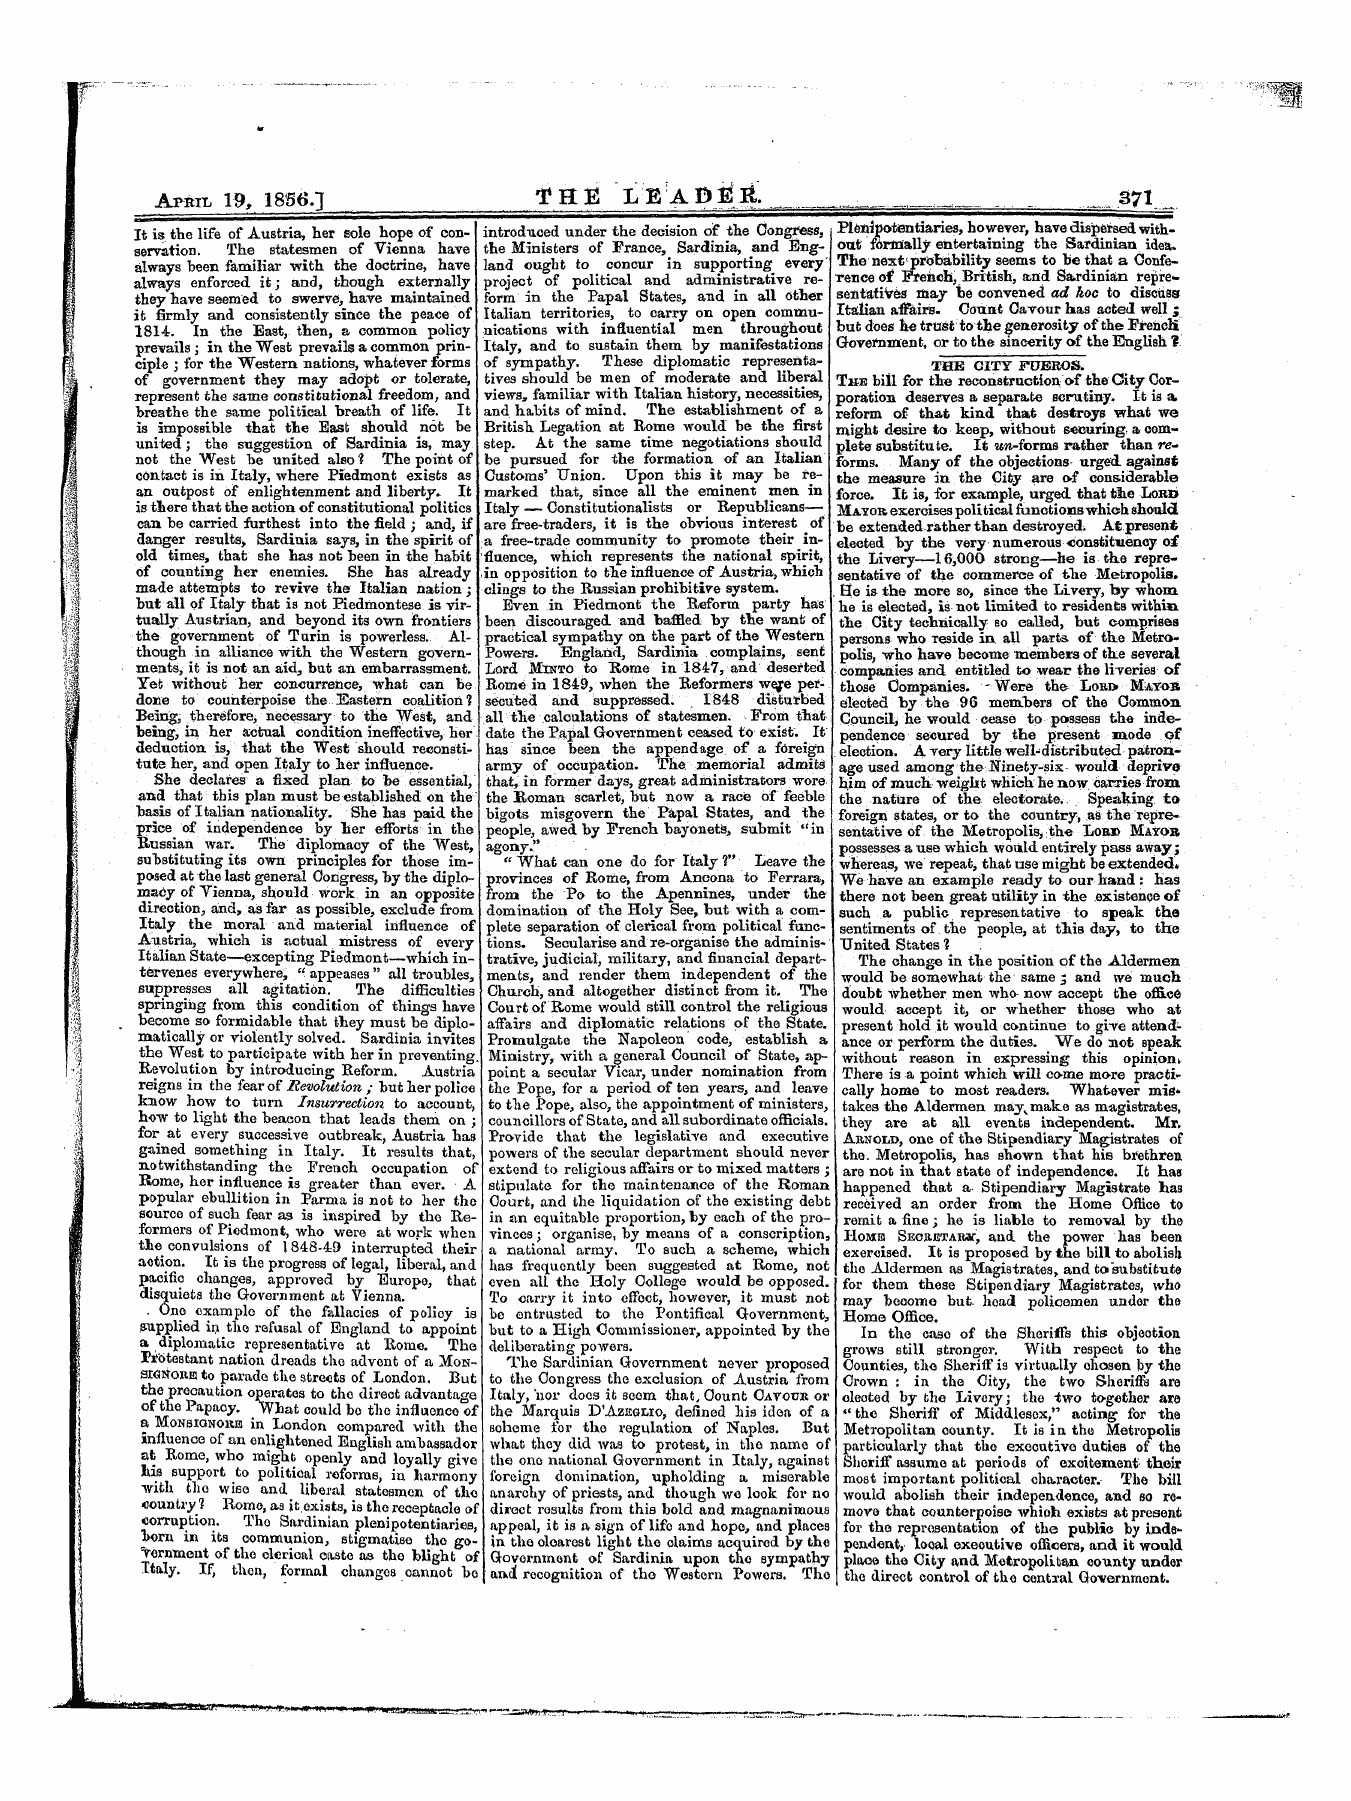 Leader (1850-1860): jS F Y, 1st edition: 11